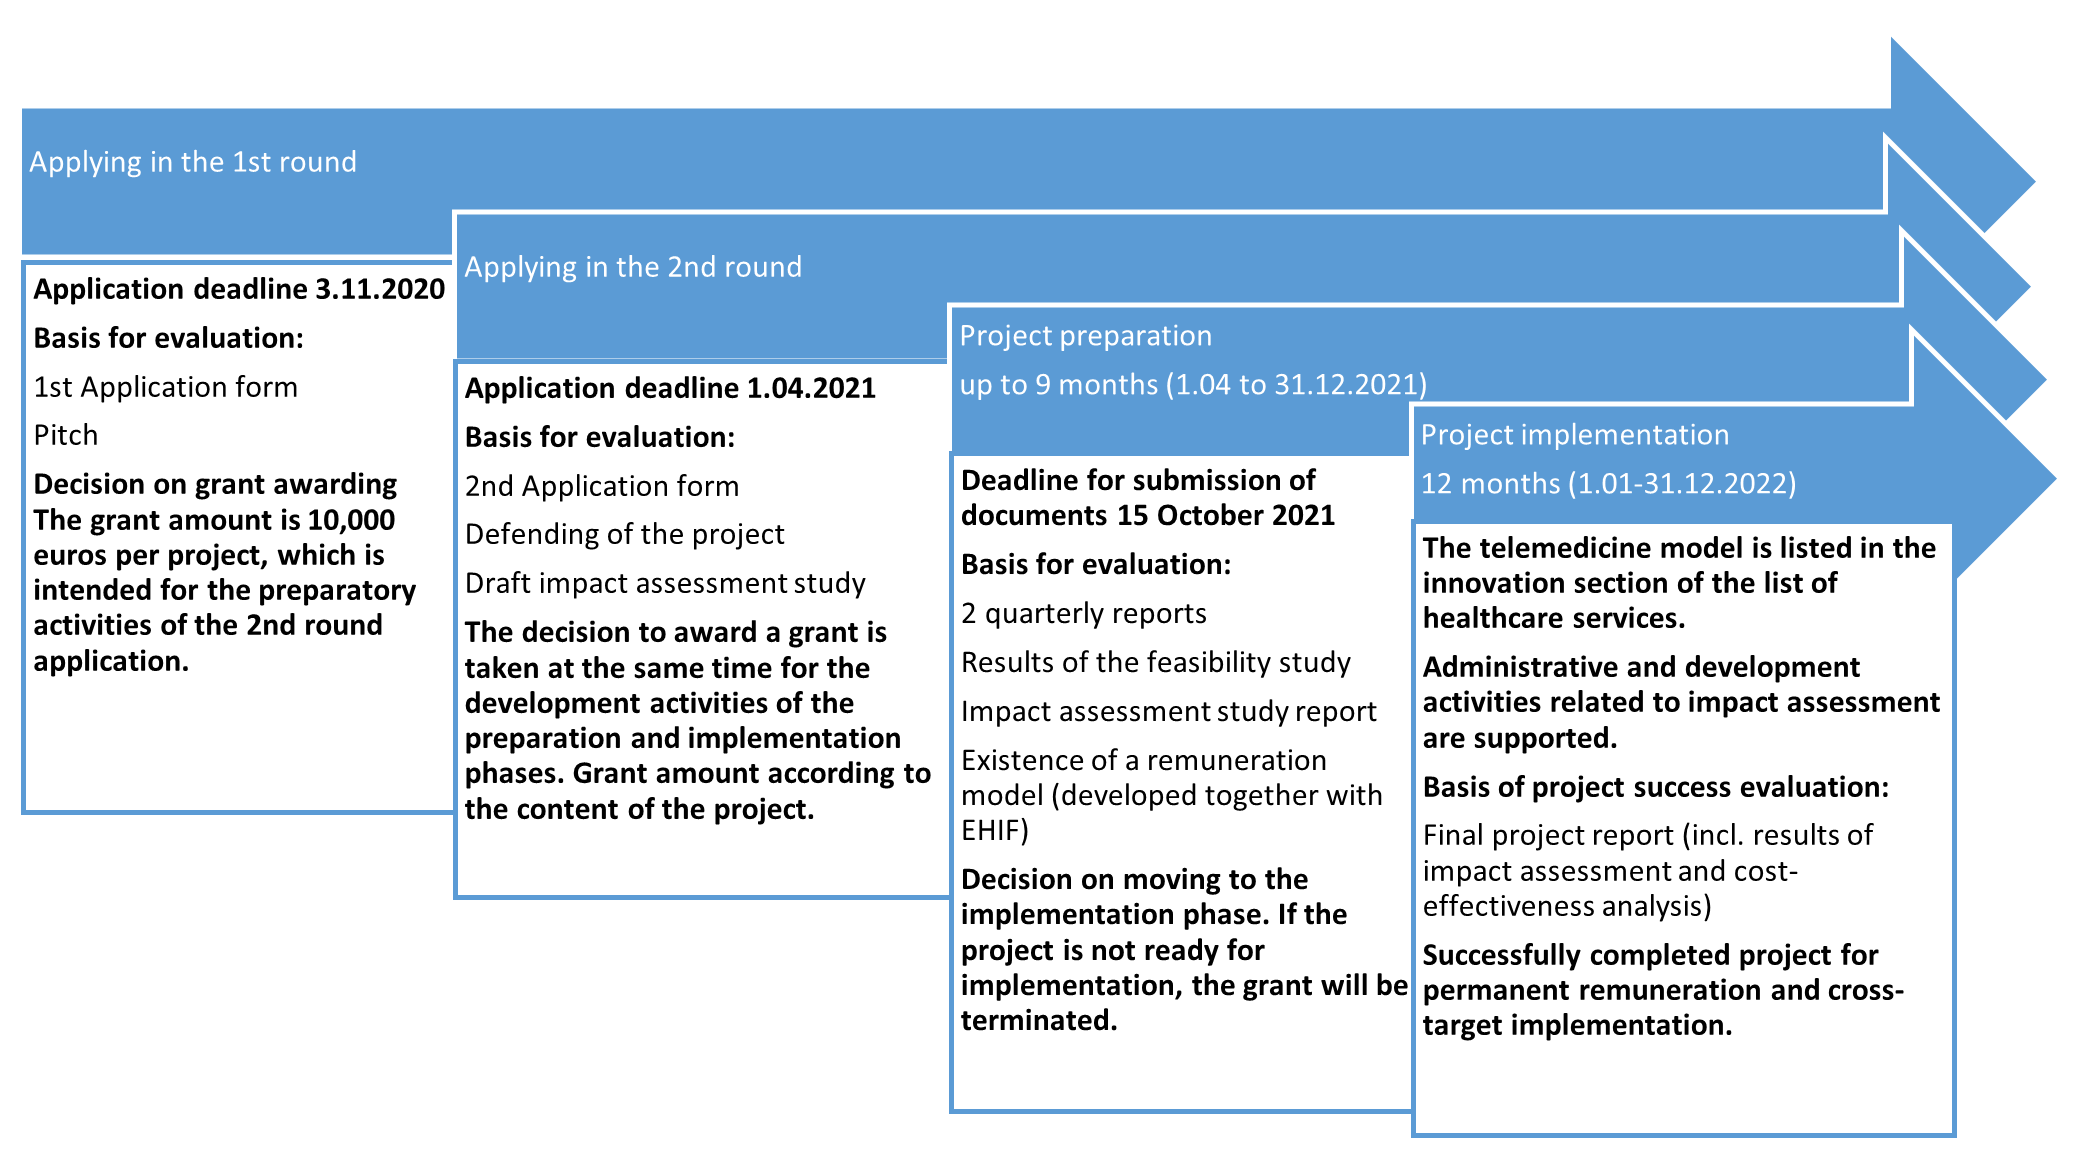 Figure 1. Structure of the pilot projects competition